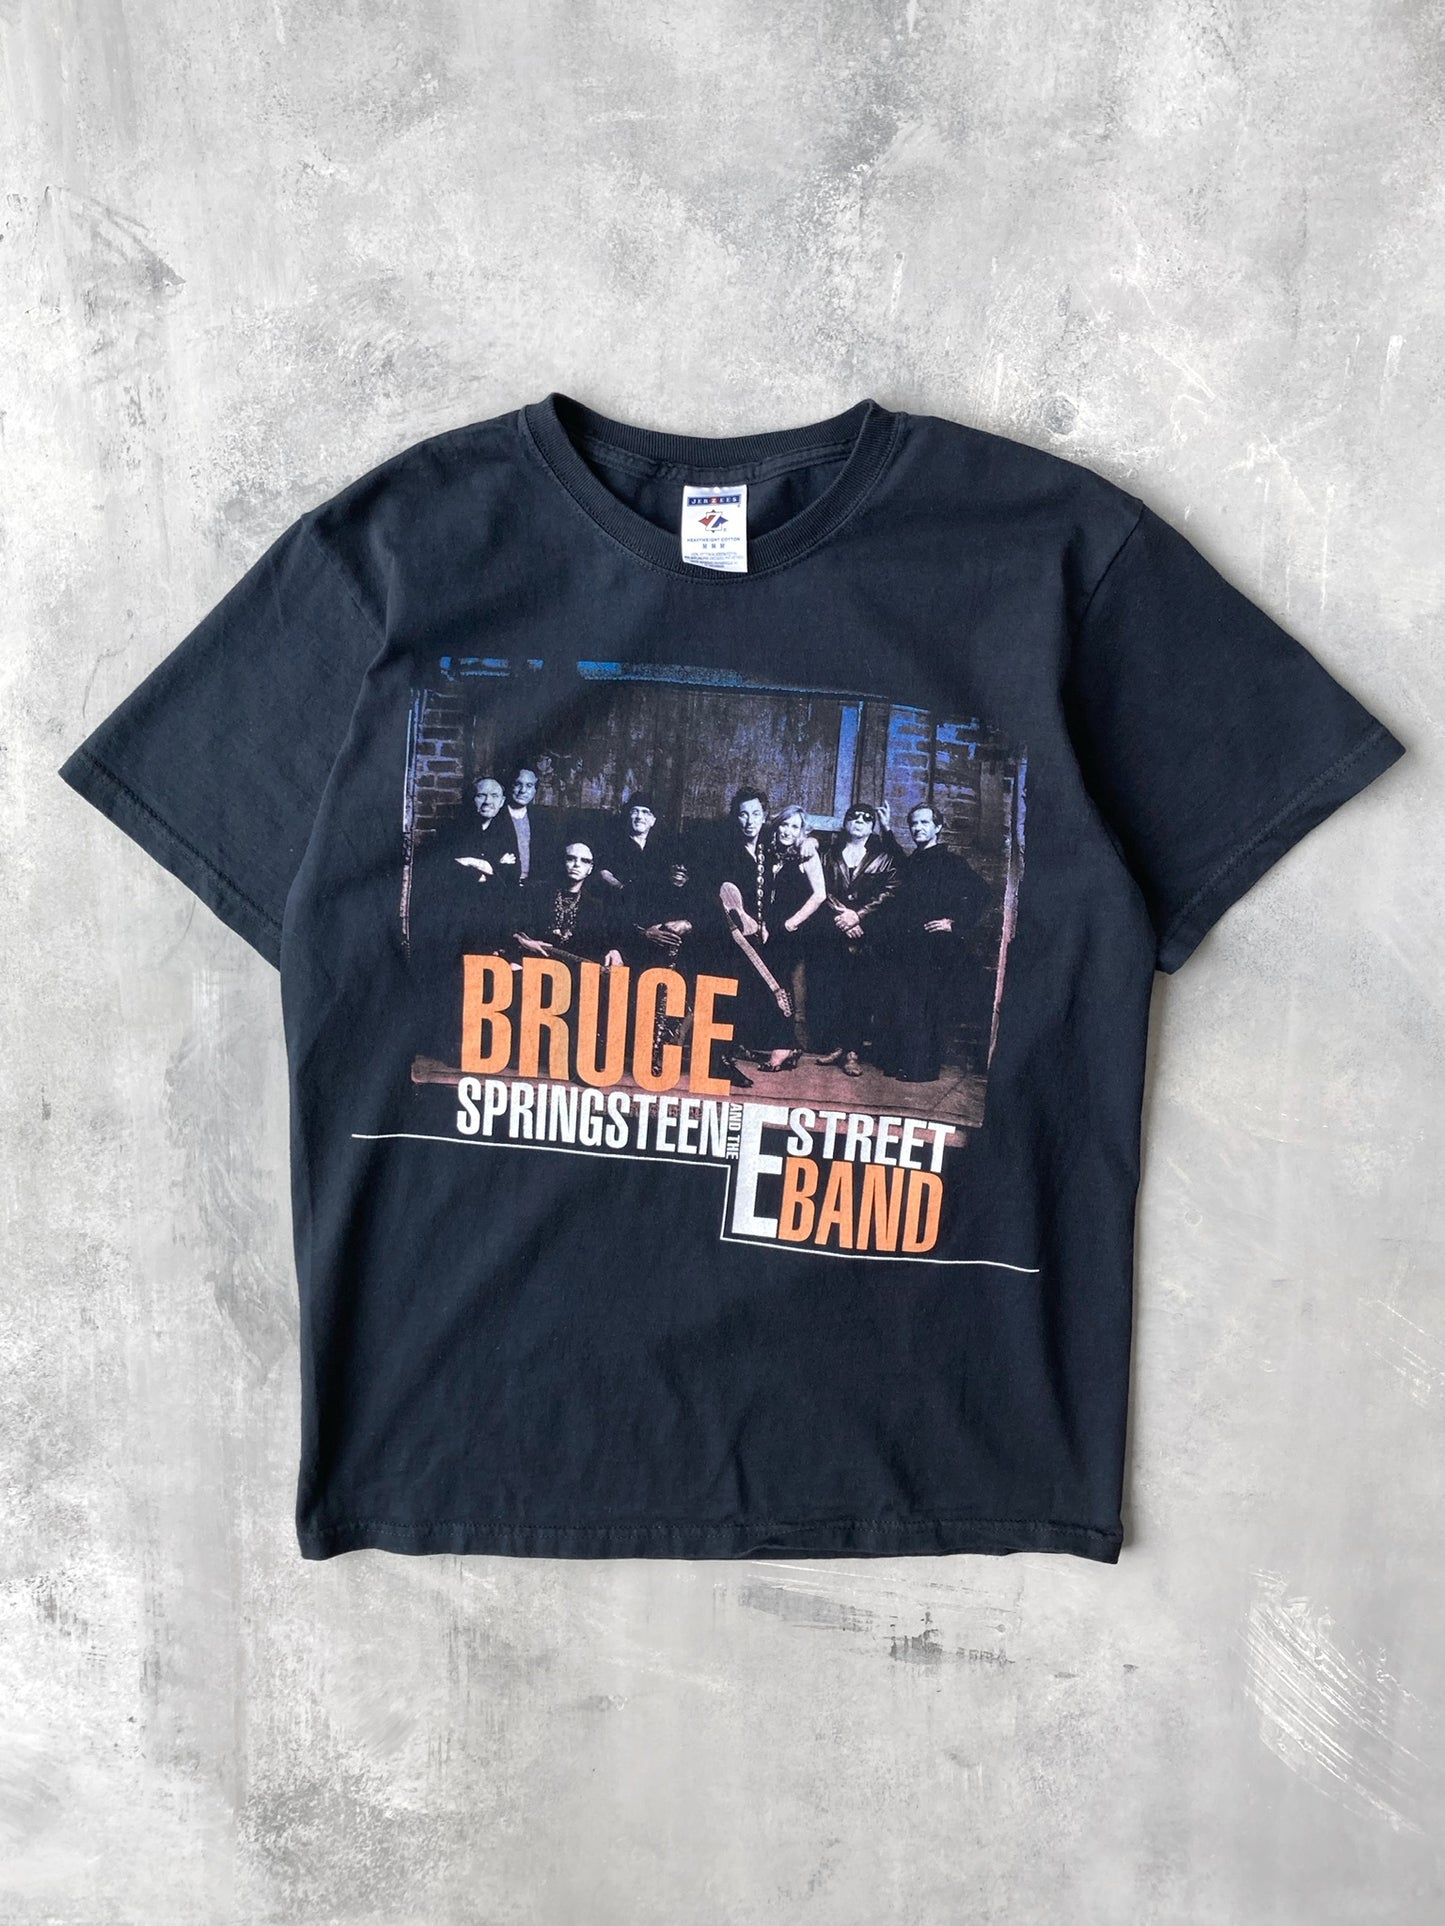 Bruce Springsteen and the E Street Band T-Shirt '08 - Medium